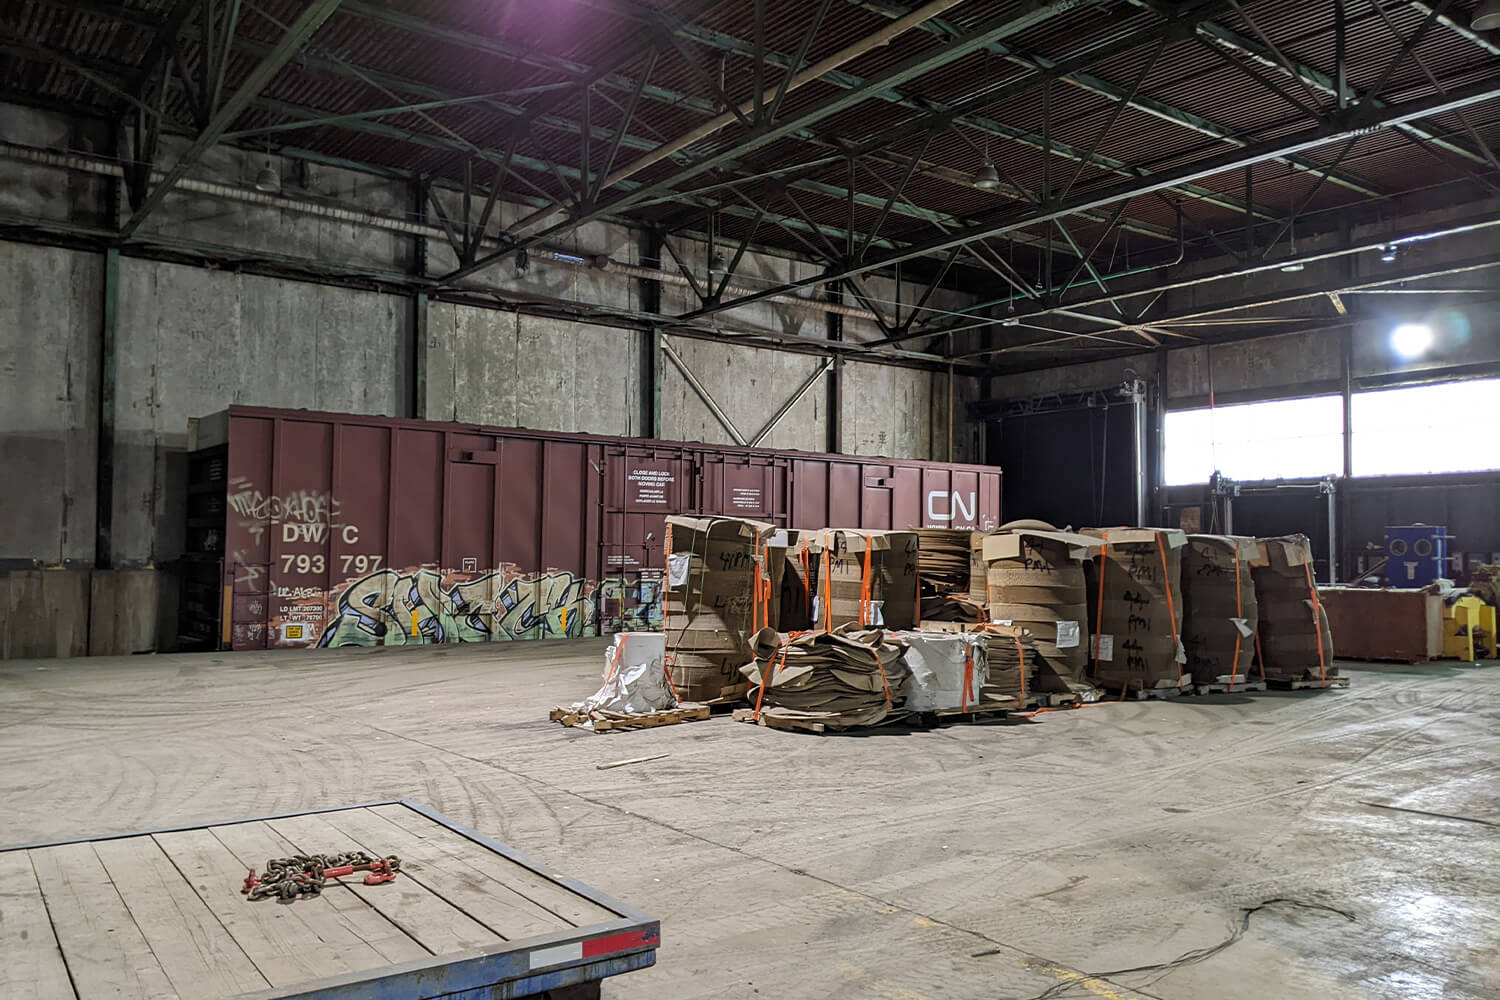 Available warehouse space, loading bay door to the right